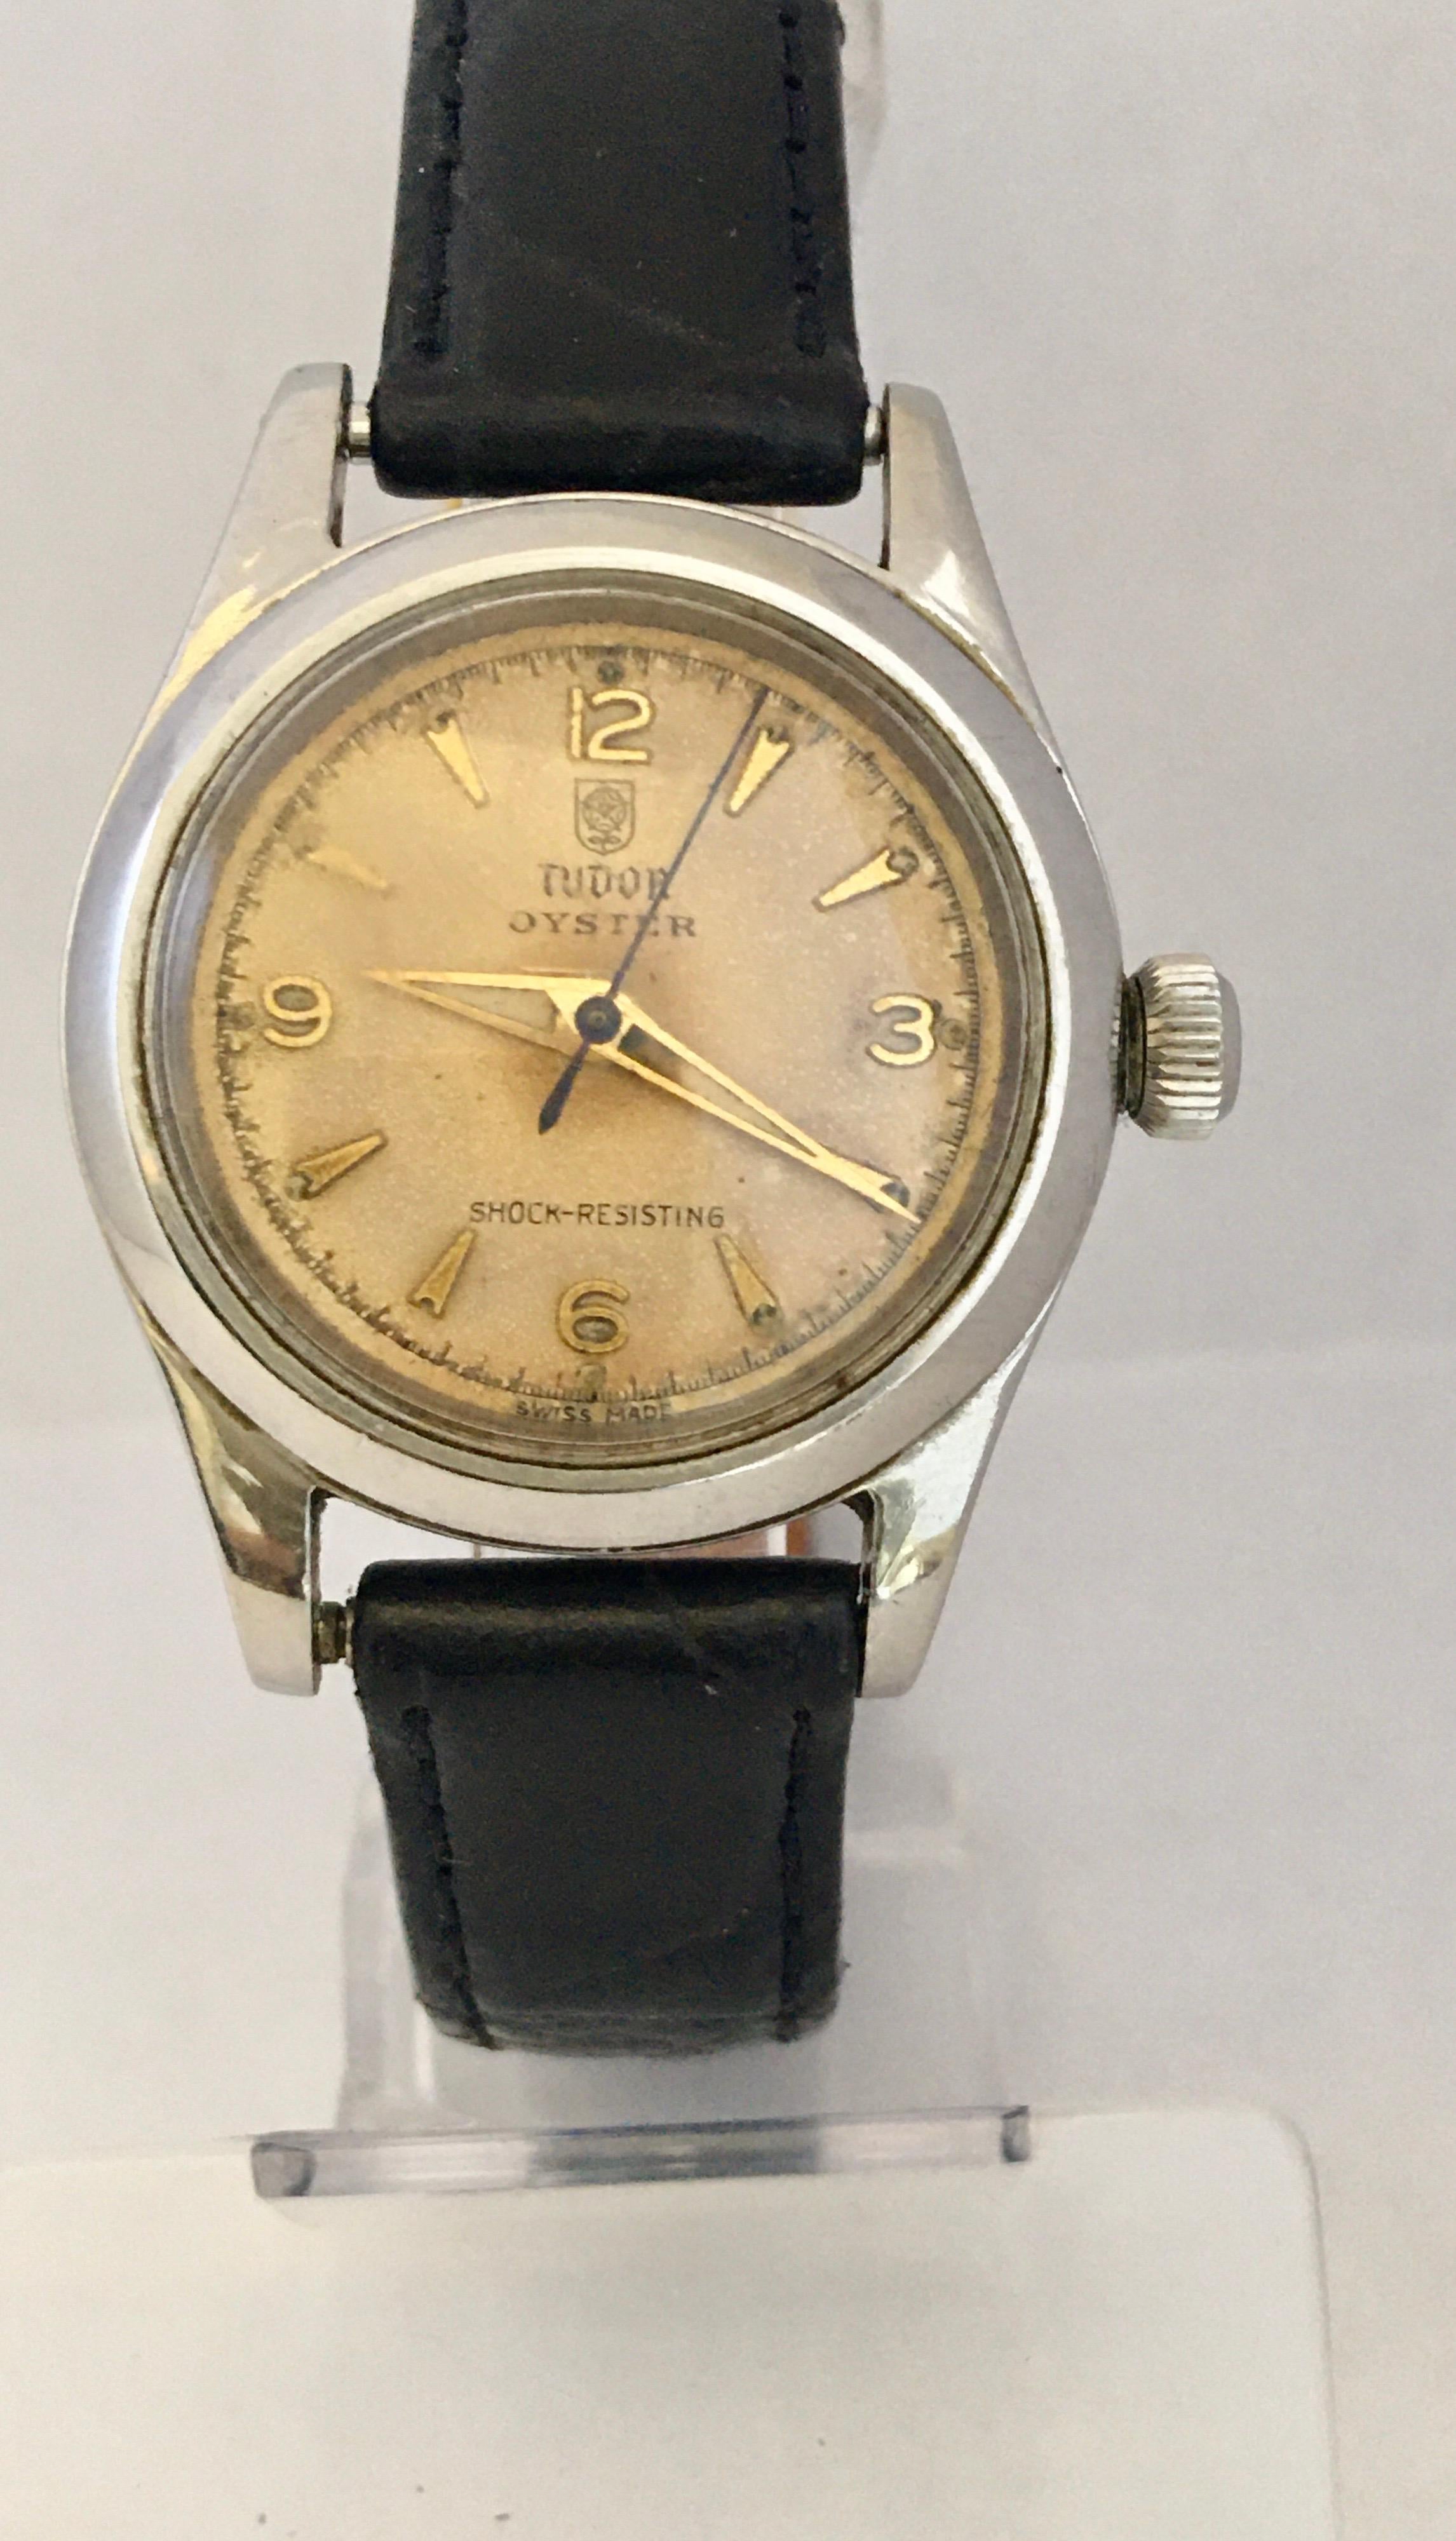 Vintage 1950s Stainless Steel Tudor Oyster Mechanical Watch For Sale 9